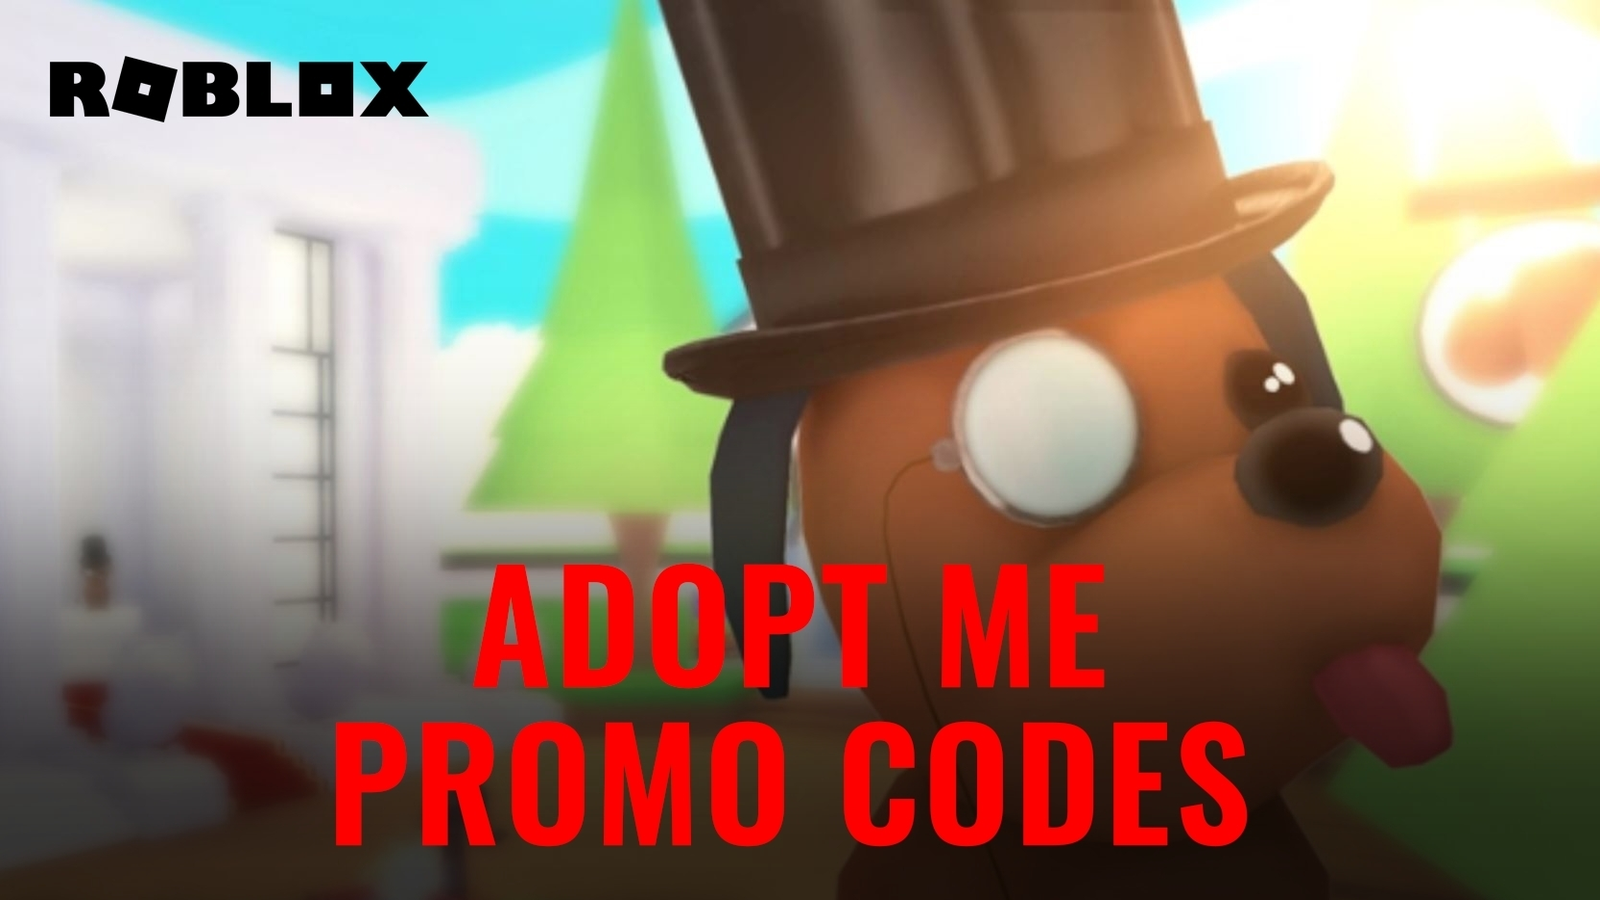 200 Roblox me ideas  roblox, roblox animation, roblox pictures